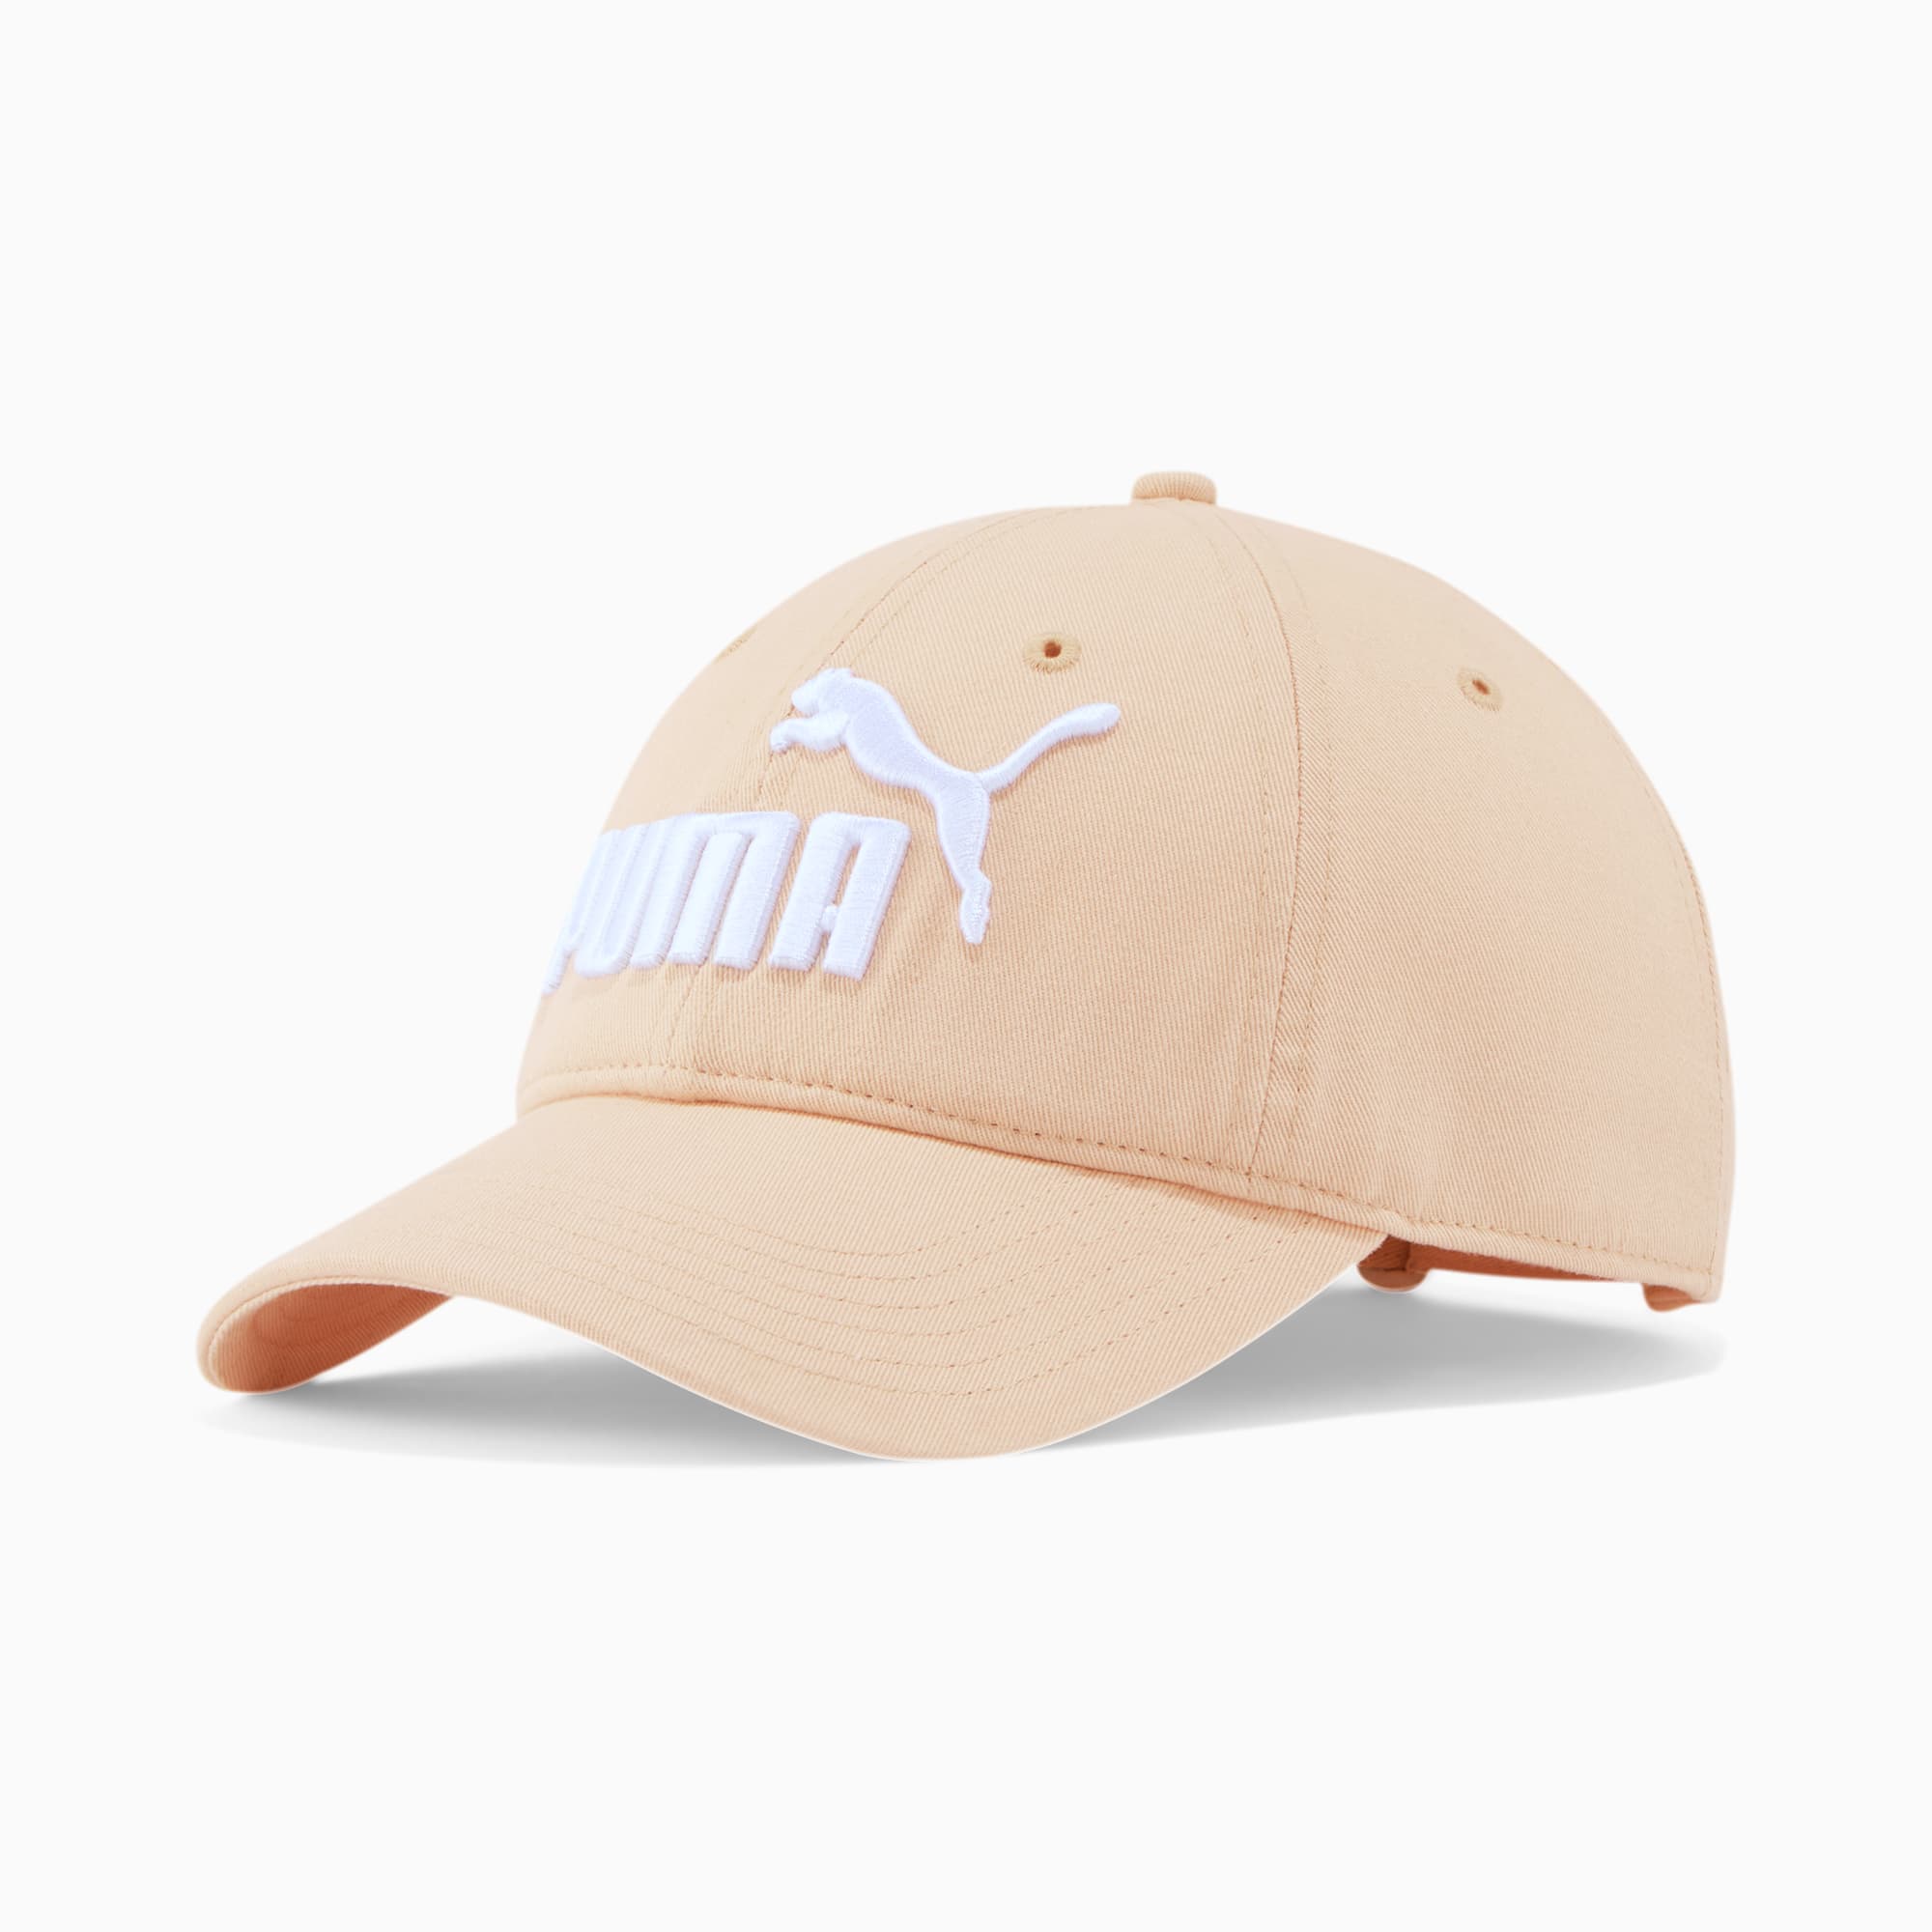 PUMA #1 Relaxed Fit Adjustable Hat 